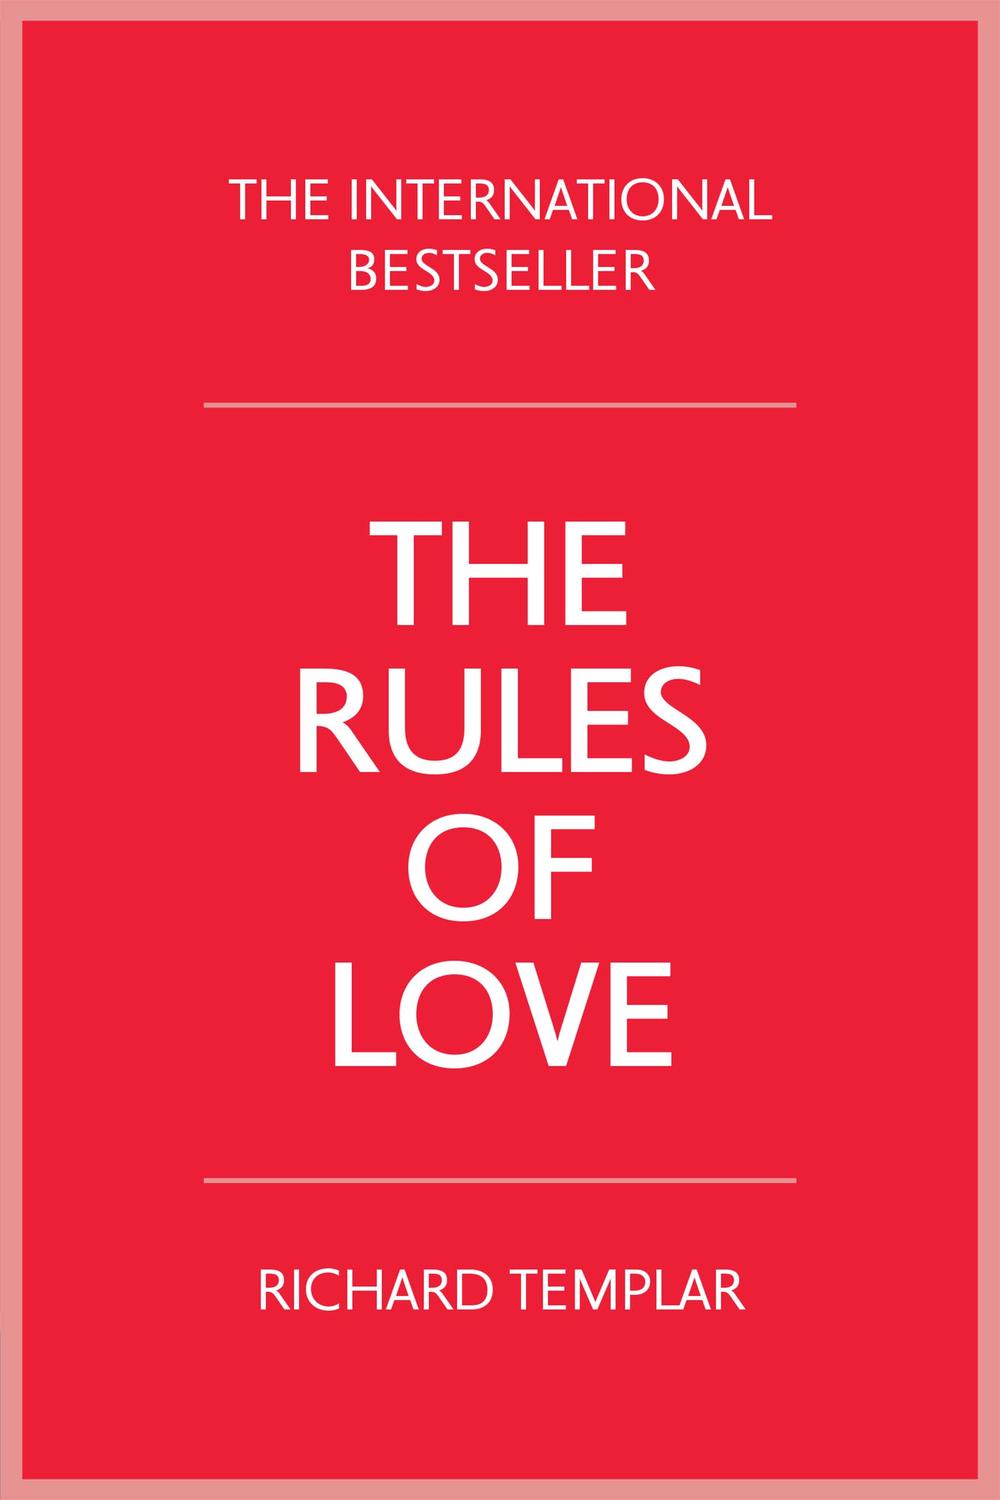 The Rules Book Pdf / Pdf The Rules Of Love By Richard Templar Perlego The rules book is now on